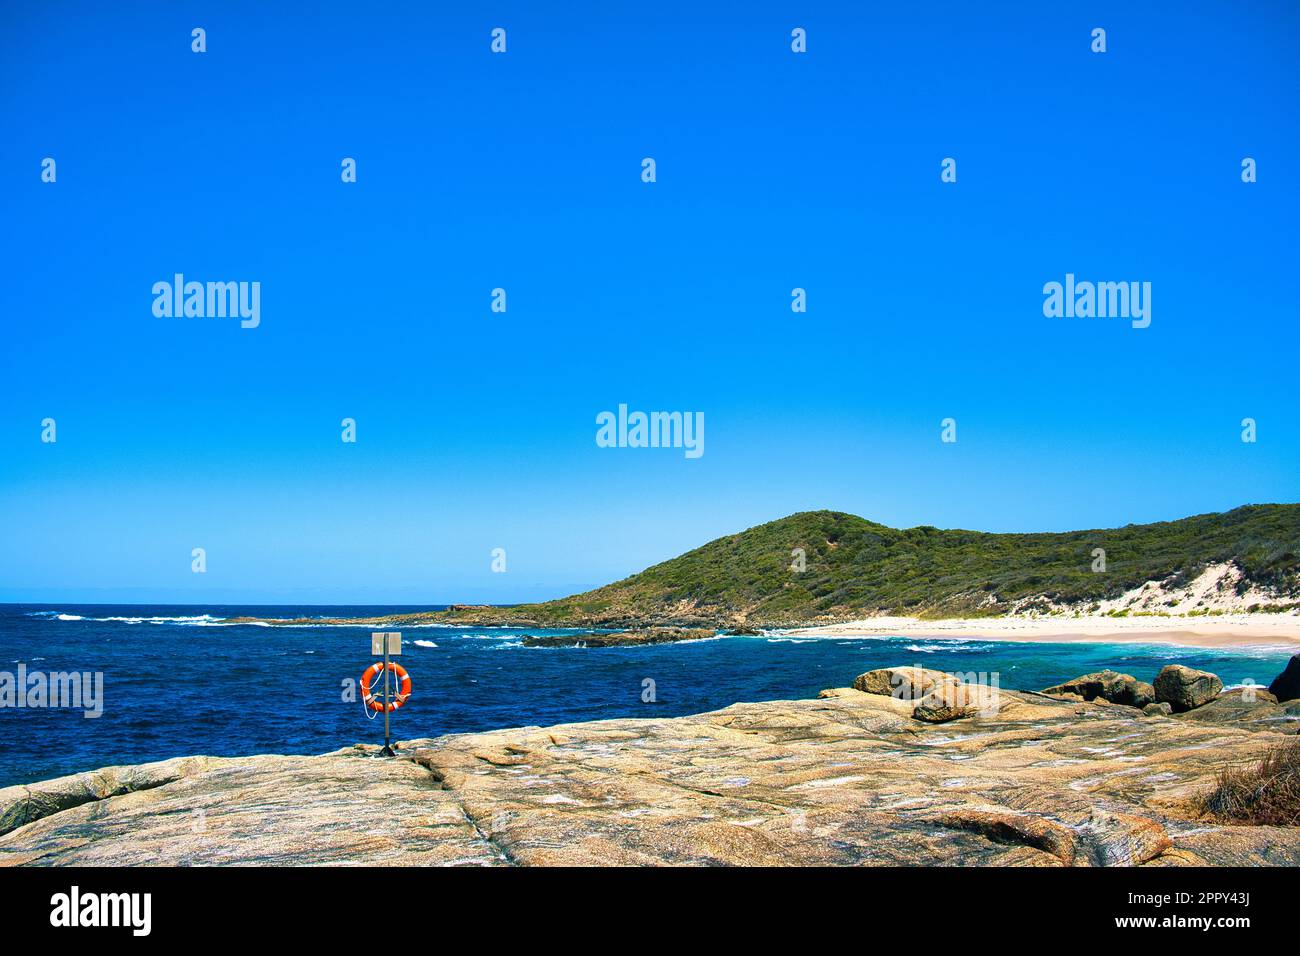 Rocky coast, heath covered hills and beach in William Bay National Park, Western Australia. Lifebuoy on a rock. Stock Photo